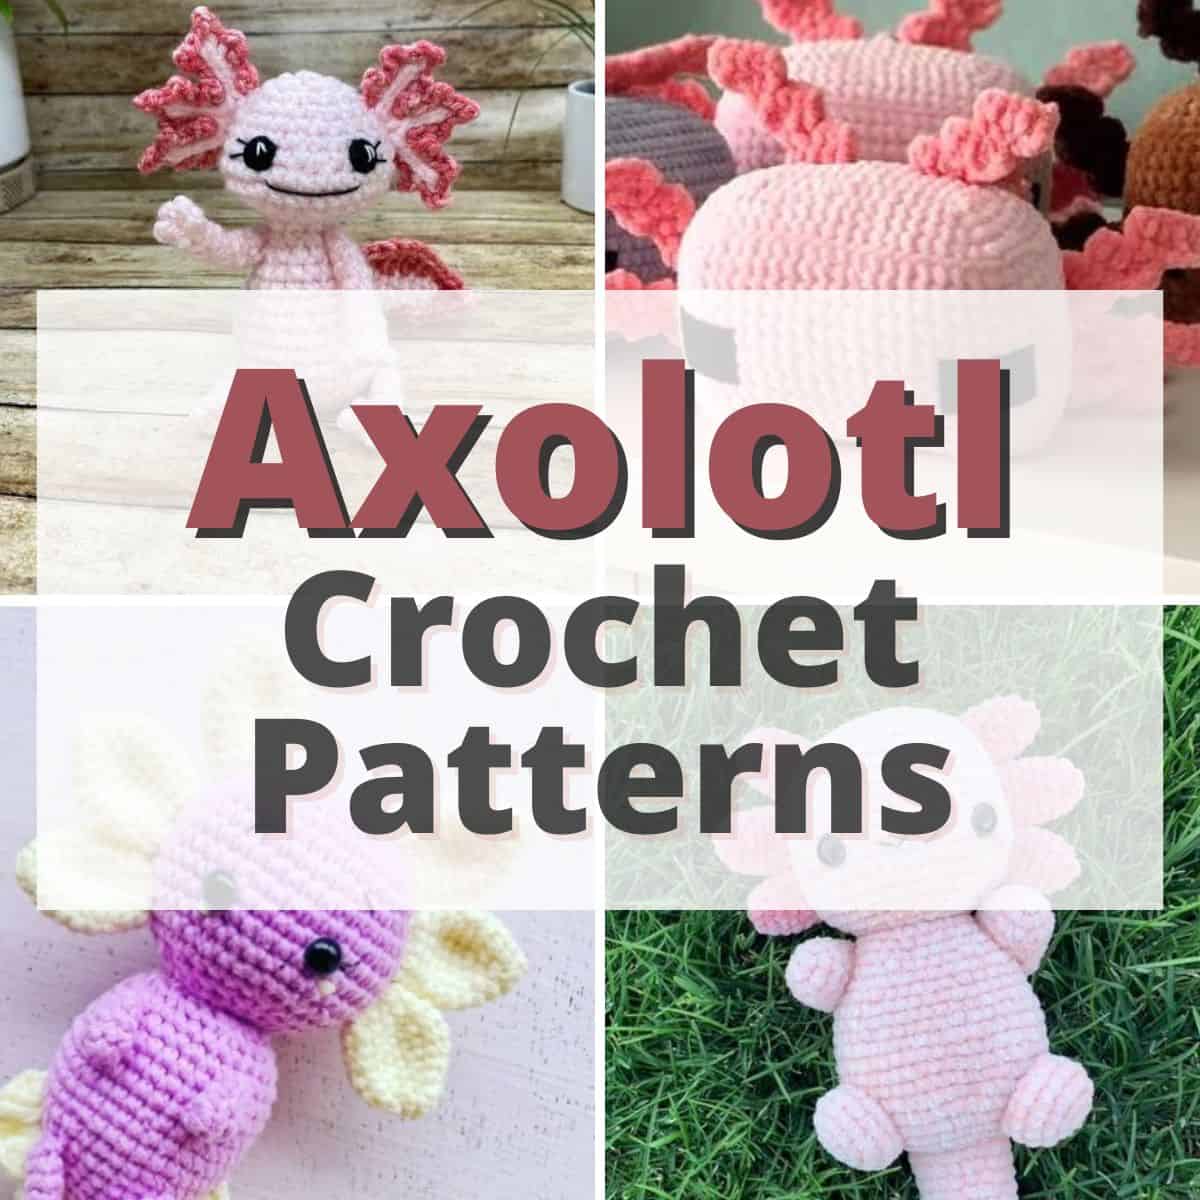 graphic reading "axolotl crochet patterns" with collage of crochet axolotls 